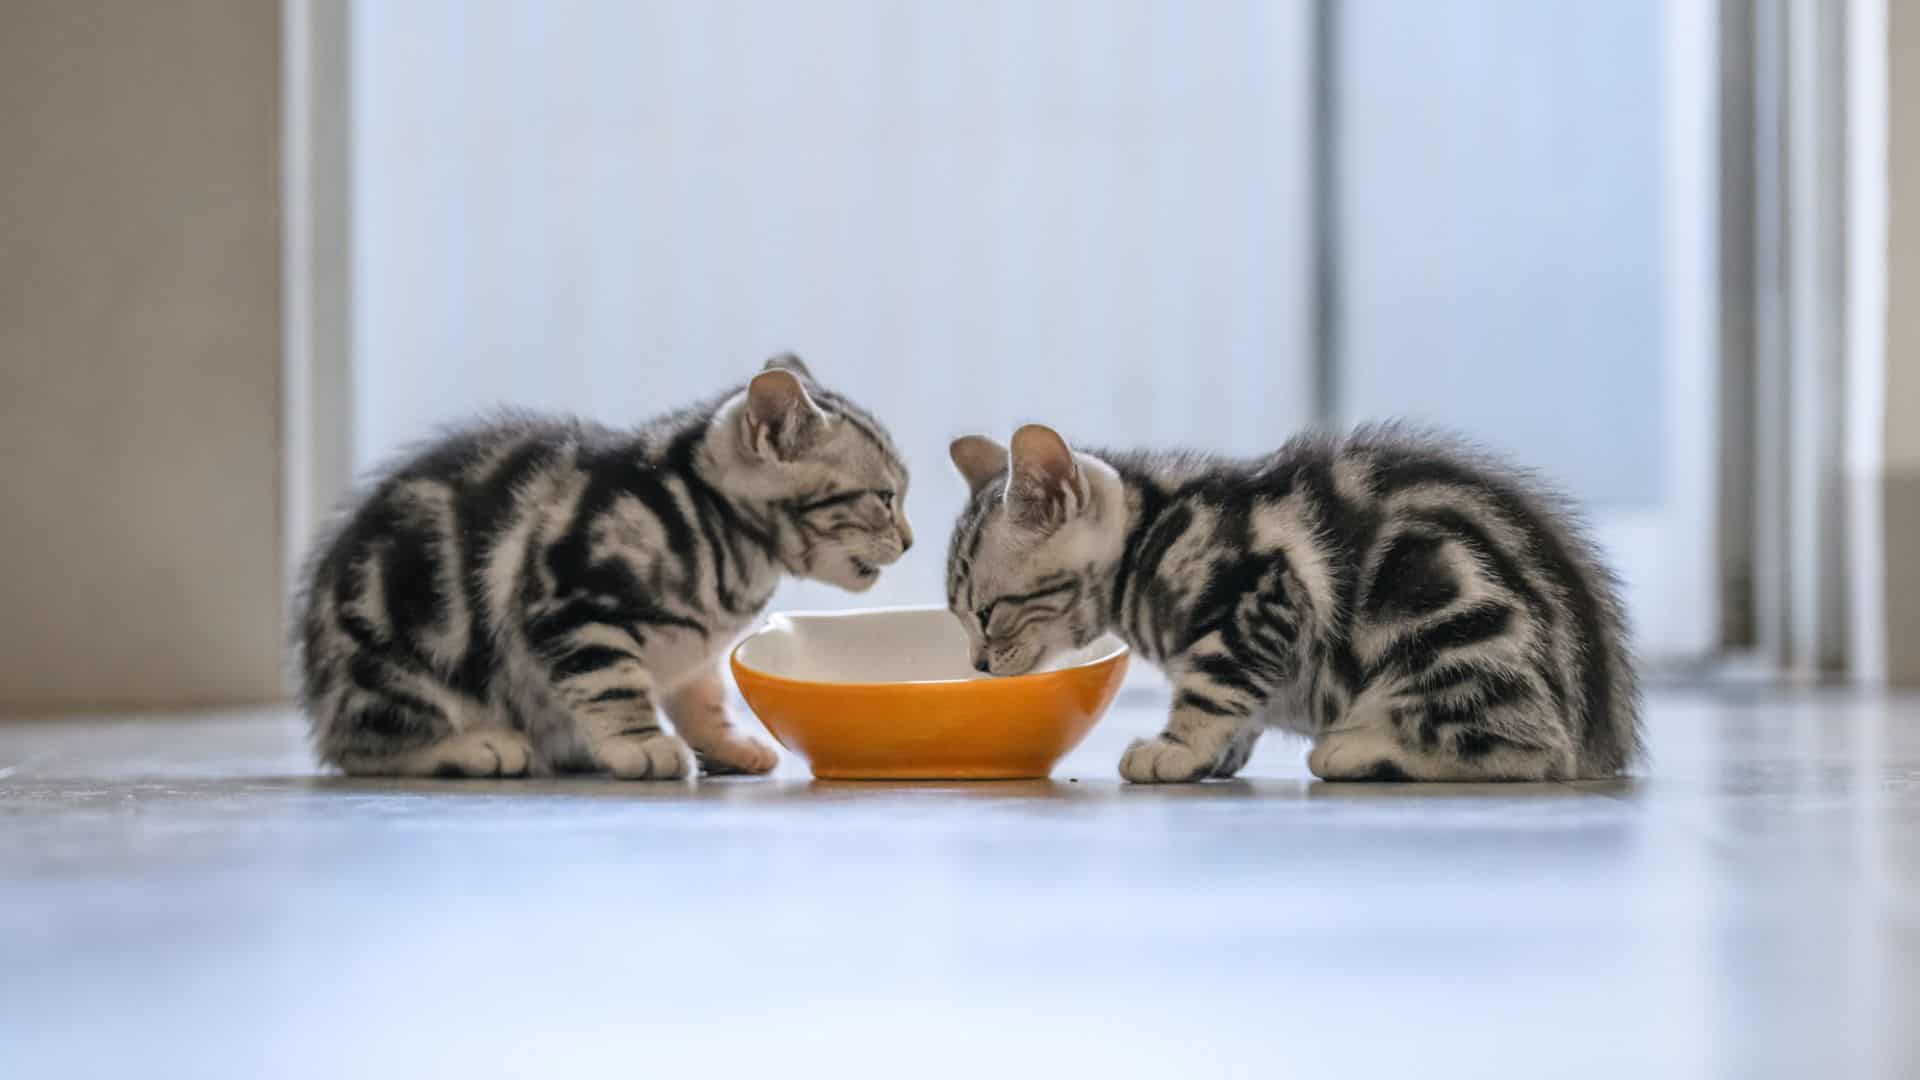 two american kittens eating best food for kittens from an orange bowl in the kitchen